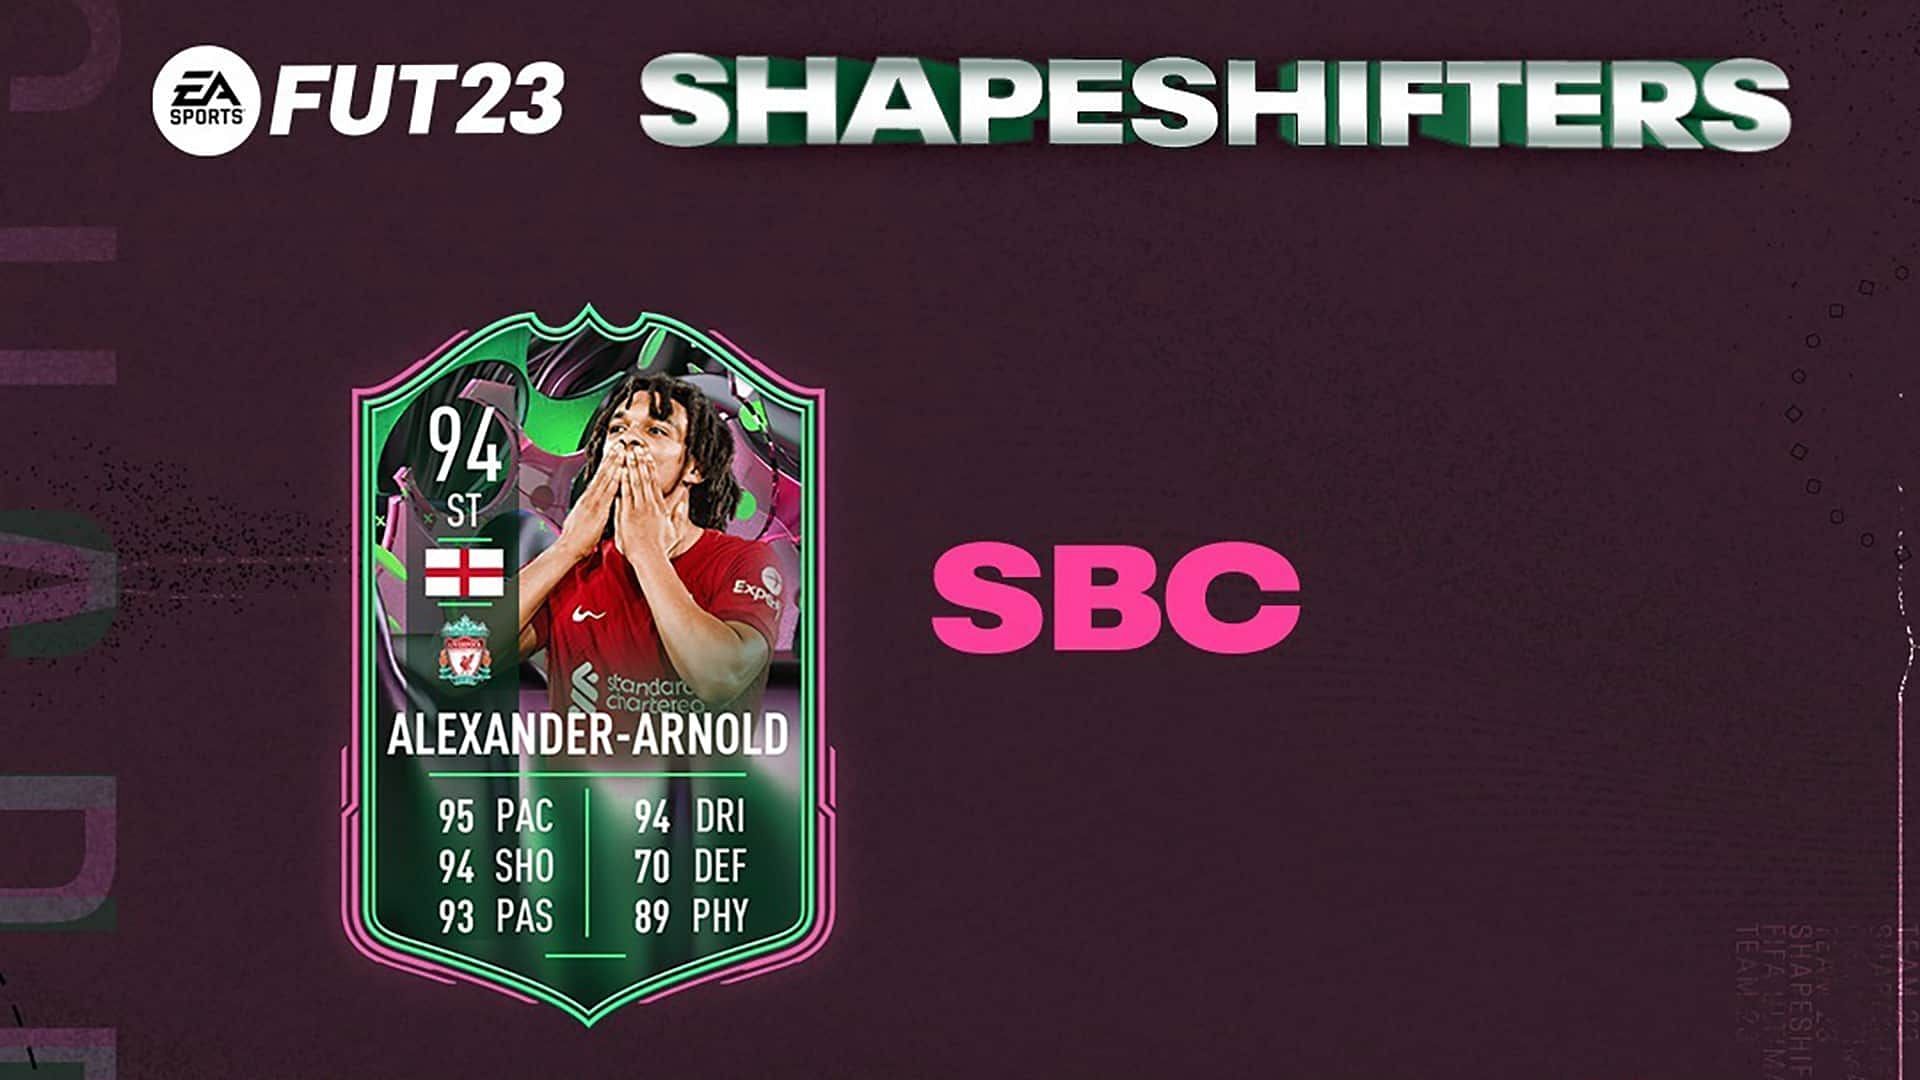 A special Trent Alexander Arnold Shapeshifters SBC is available in FIFA 23 (Image via EA Sports)